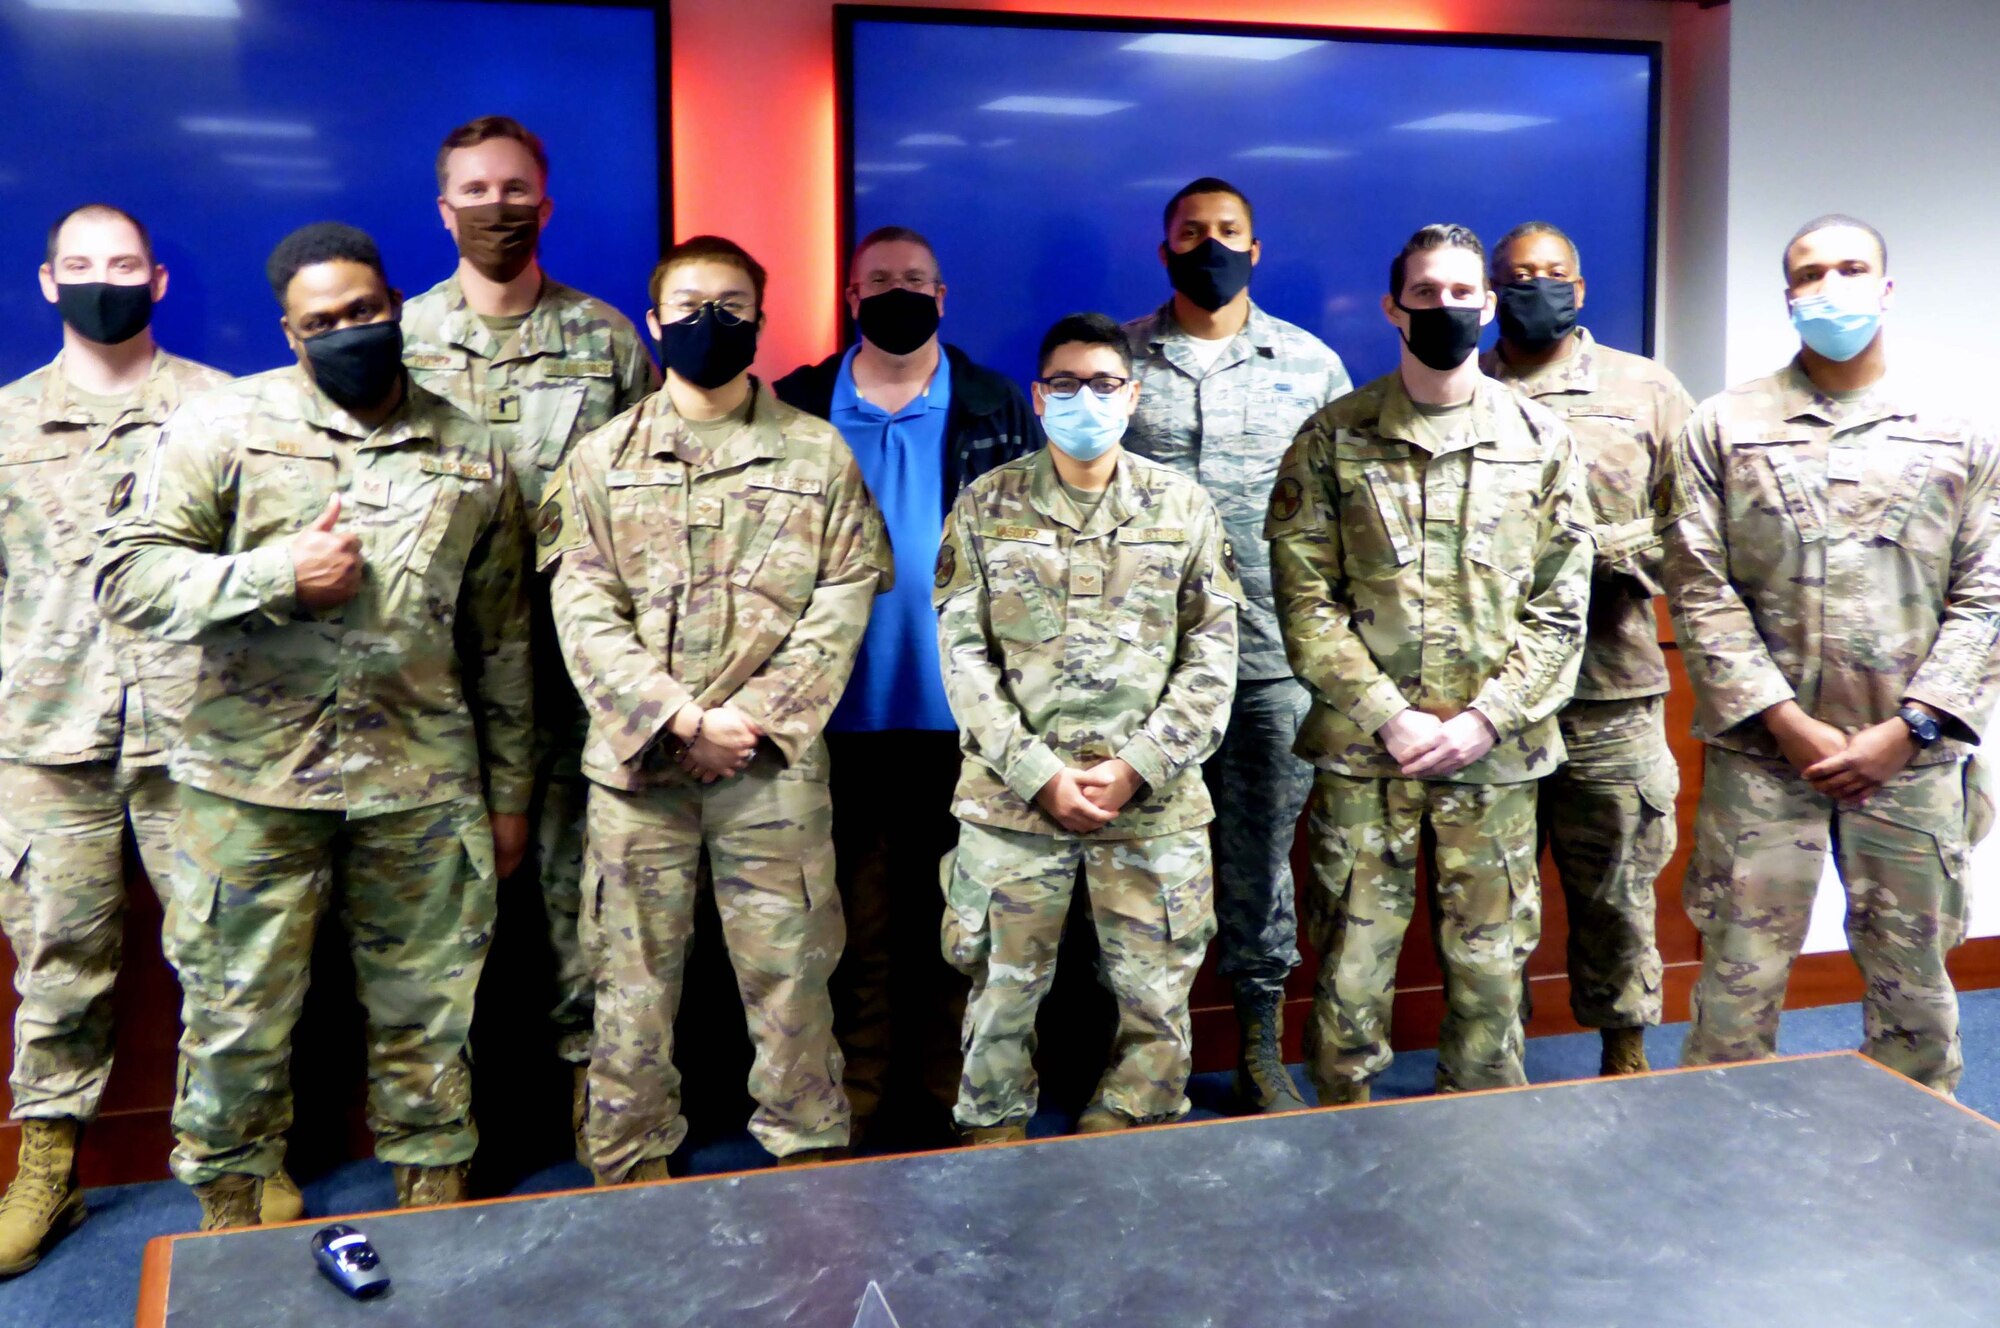 Air Force Special Operations Command Airmen pose for a photo after completing the command's Mission Defense Conference at Hurlburt Field, Fla., Feb. 5, 2021. The conference focused on identifying the organic cyber capabilities needed to protect missions against threats in, through, and from cyberspace. (U.S. Air Force photo by Senior Airman Brandon Esau)